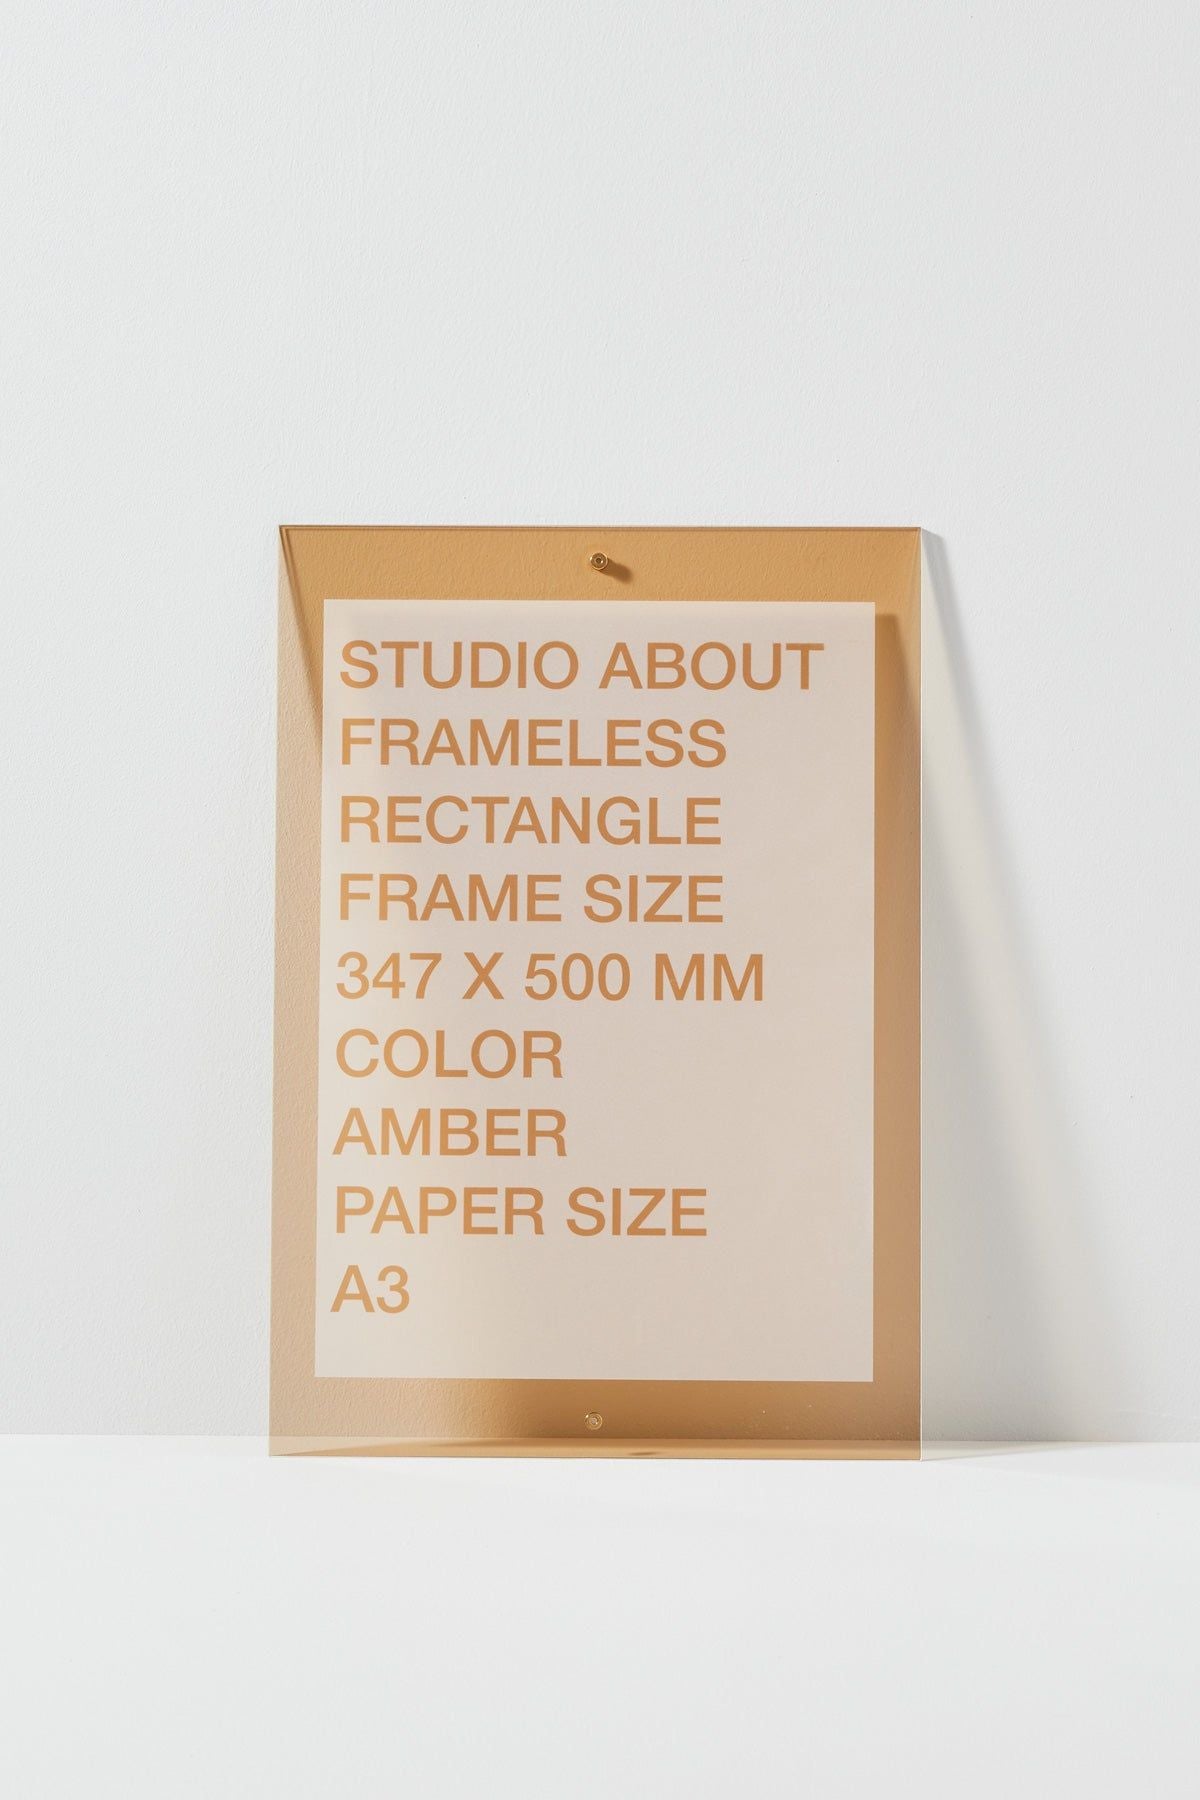 Studio About Frameless Frame A3 Rectangle, Amber